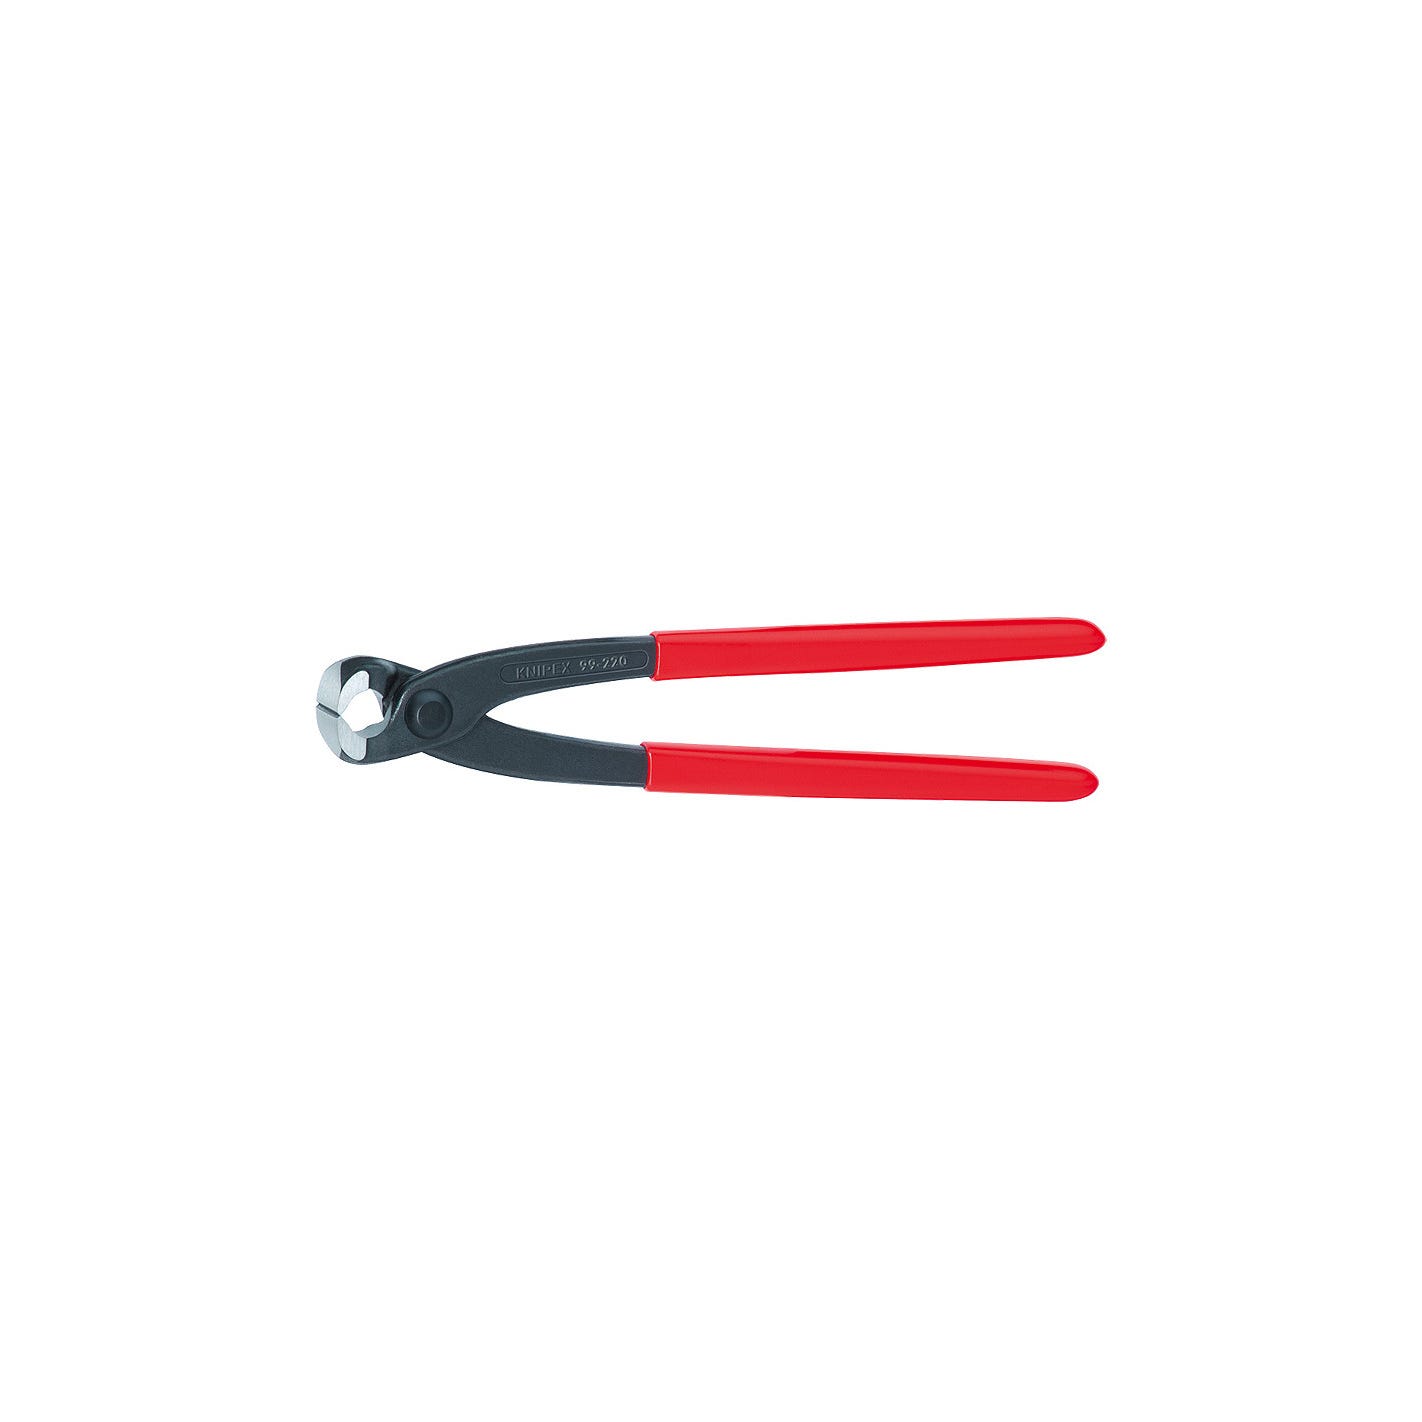 Tenaille Russe 200 Mm | 9901200 - Knipex 0